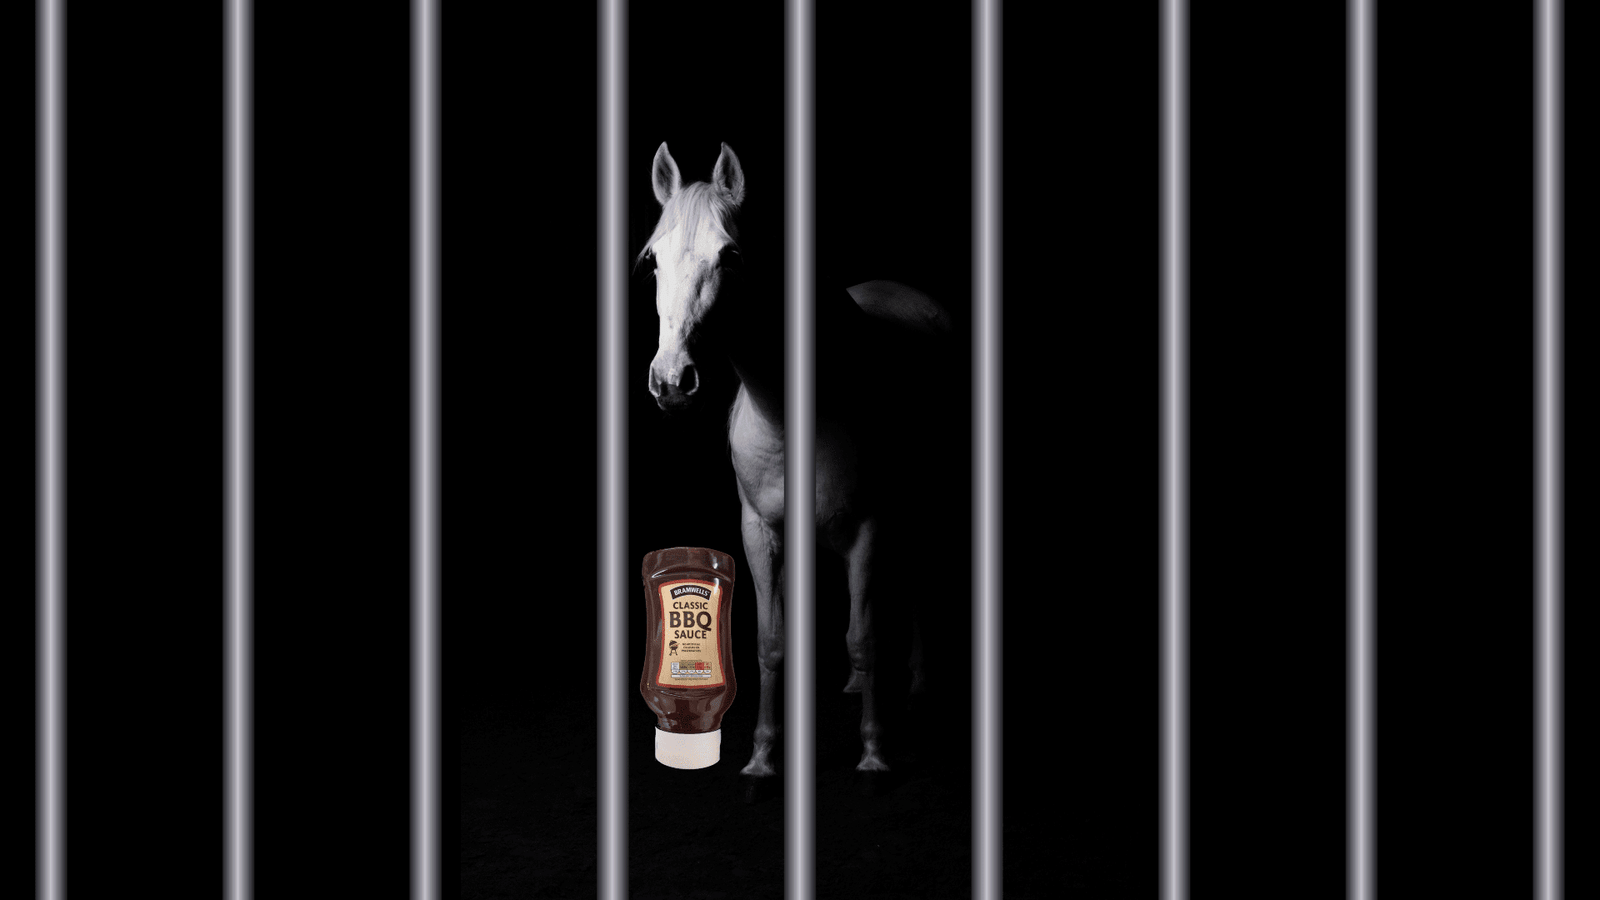 horse behind bars with bbq sauce